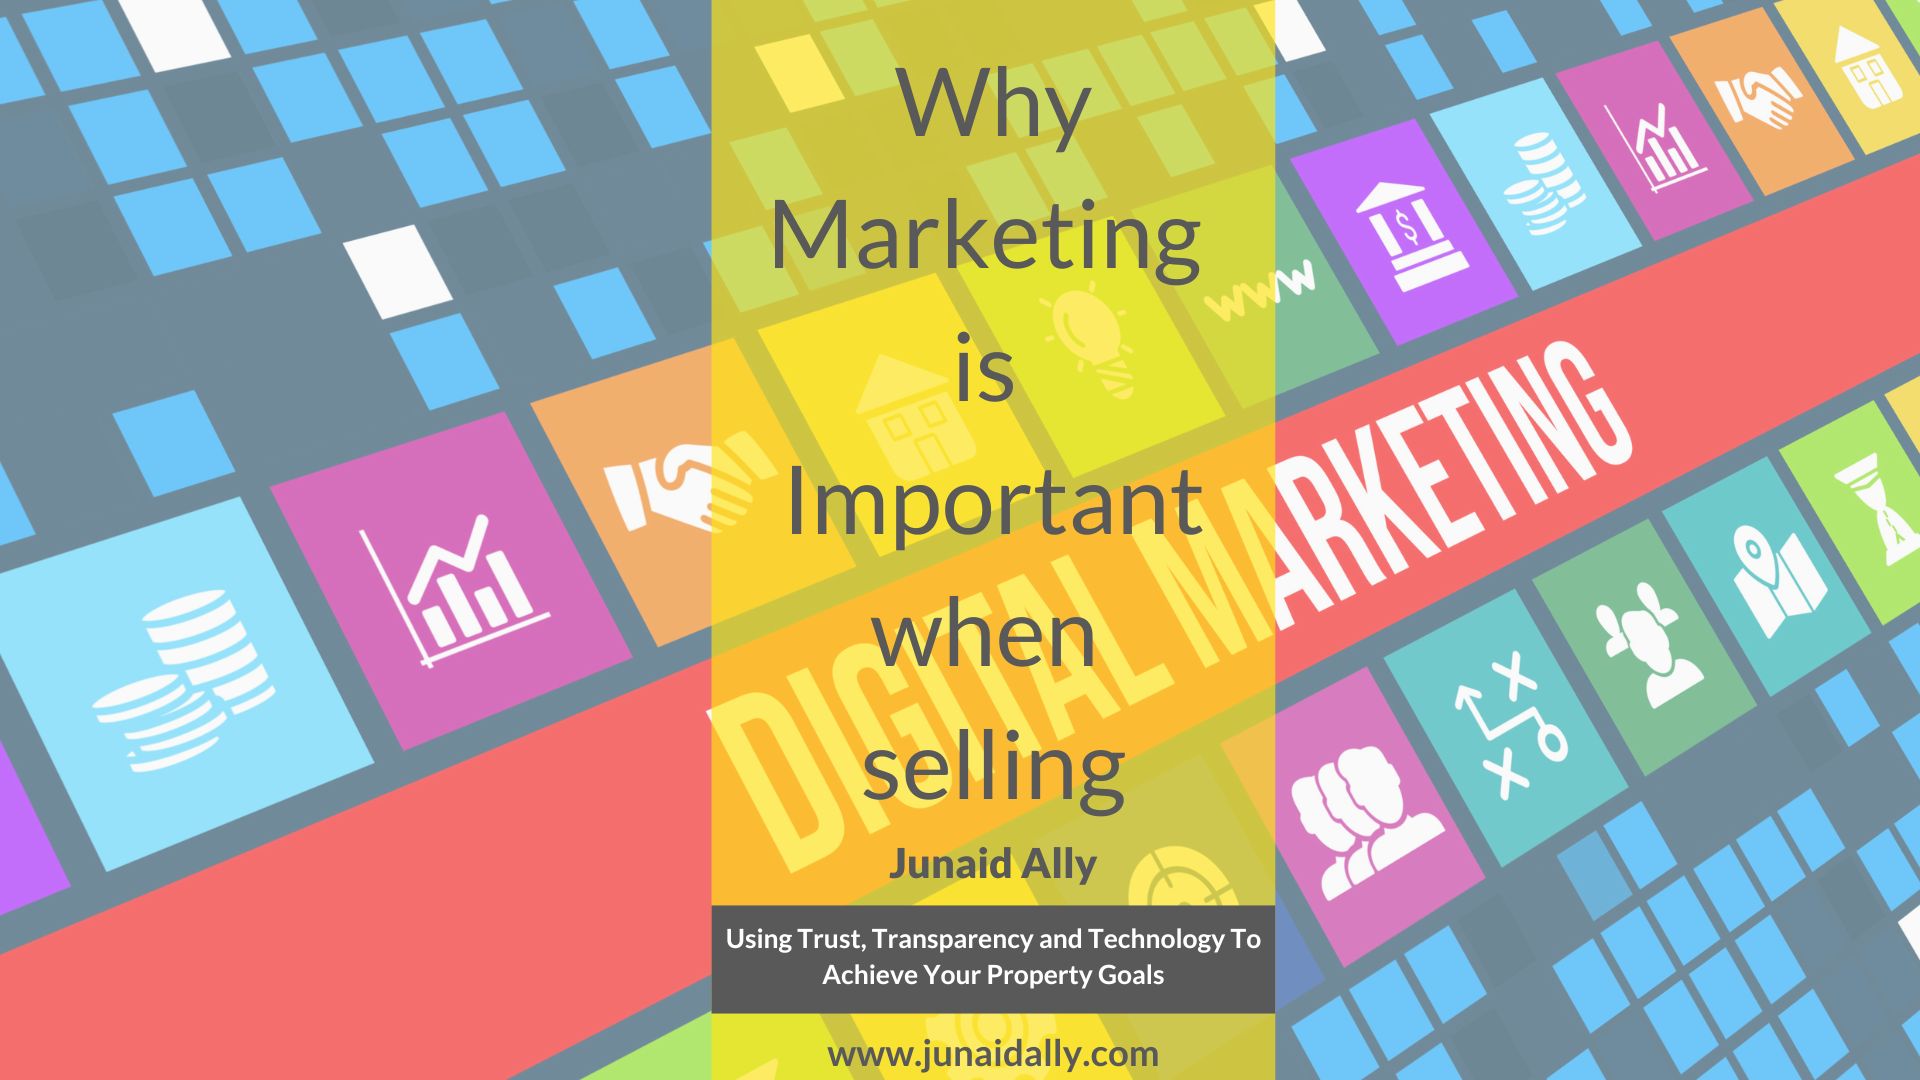 Why Marketing is Important When Selling Your Home?